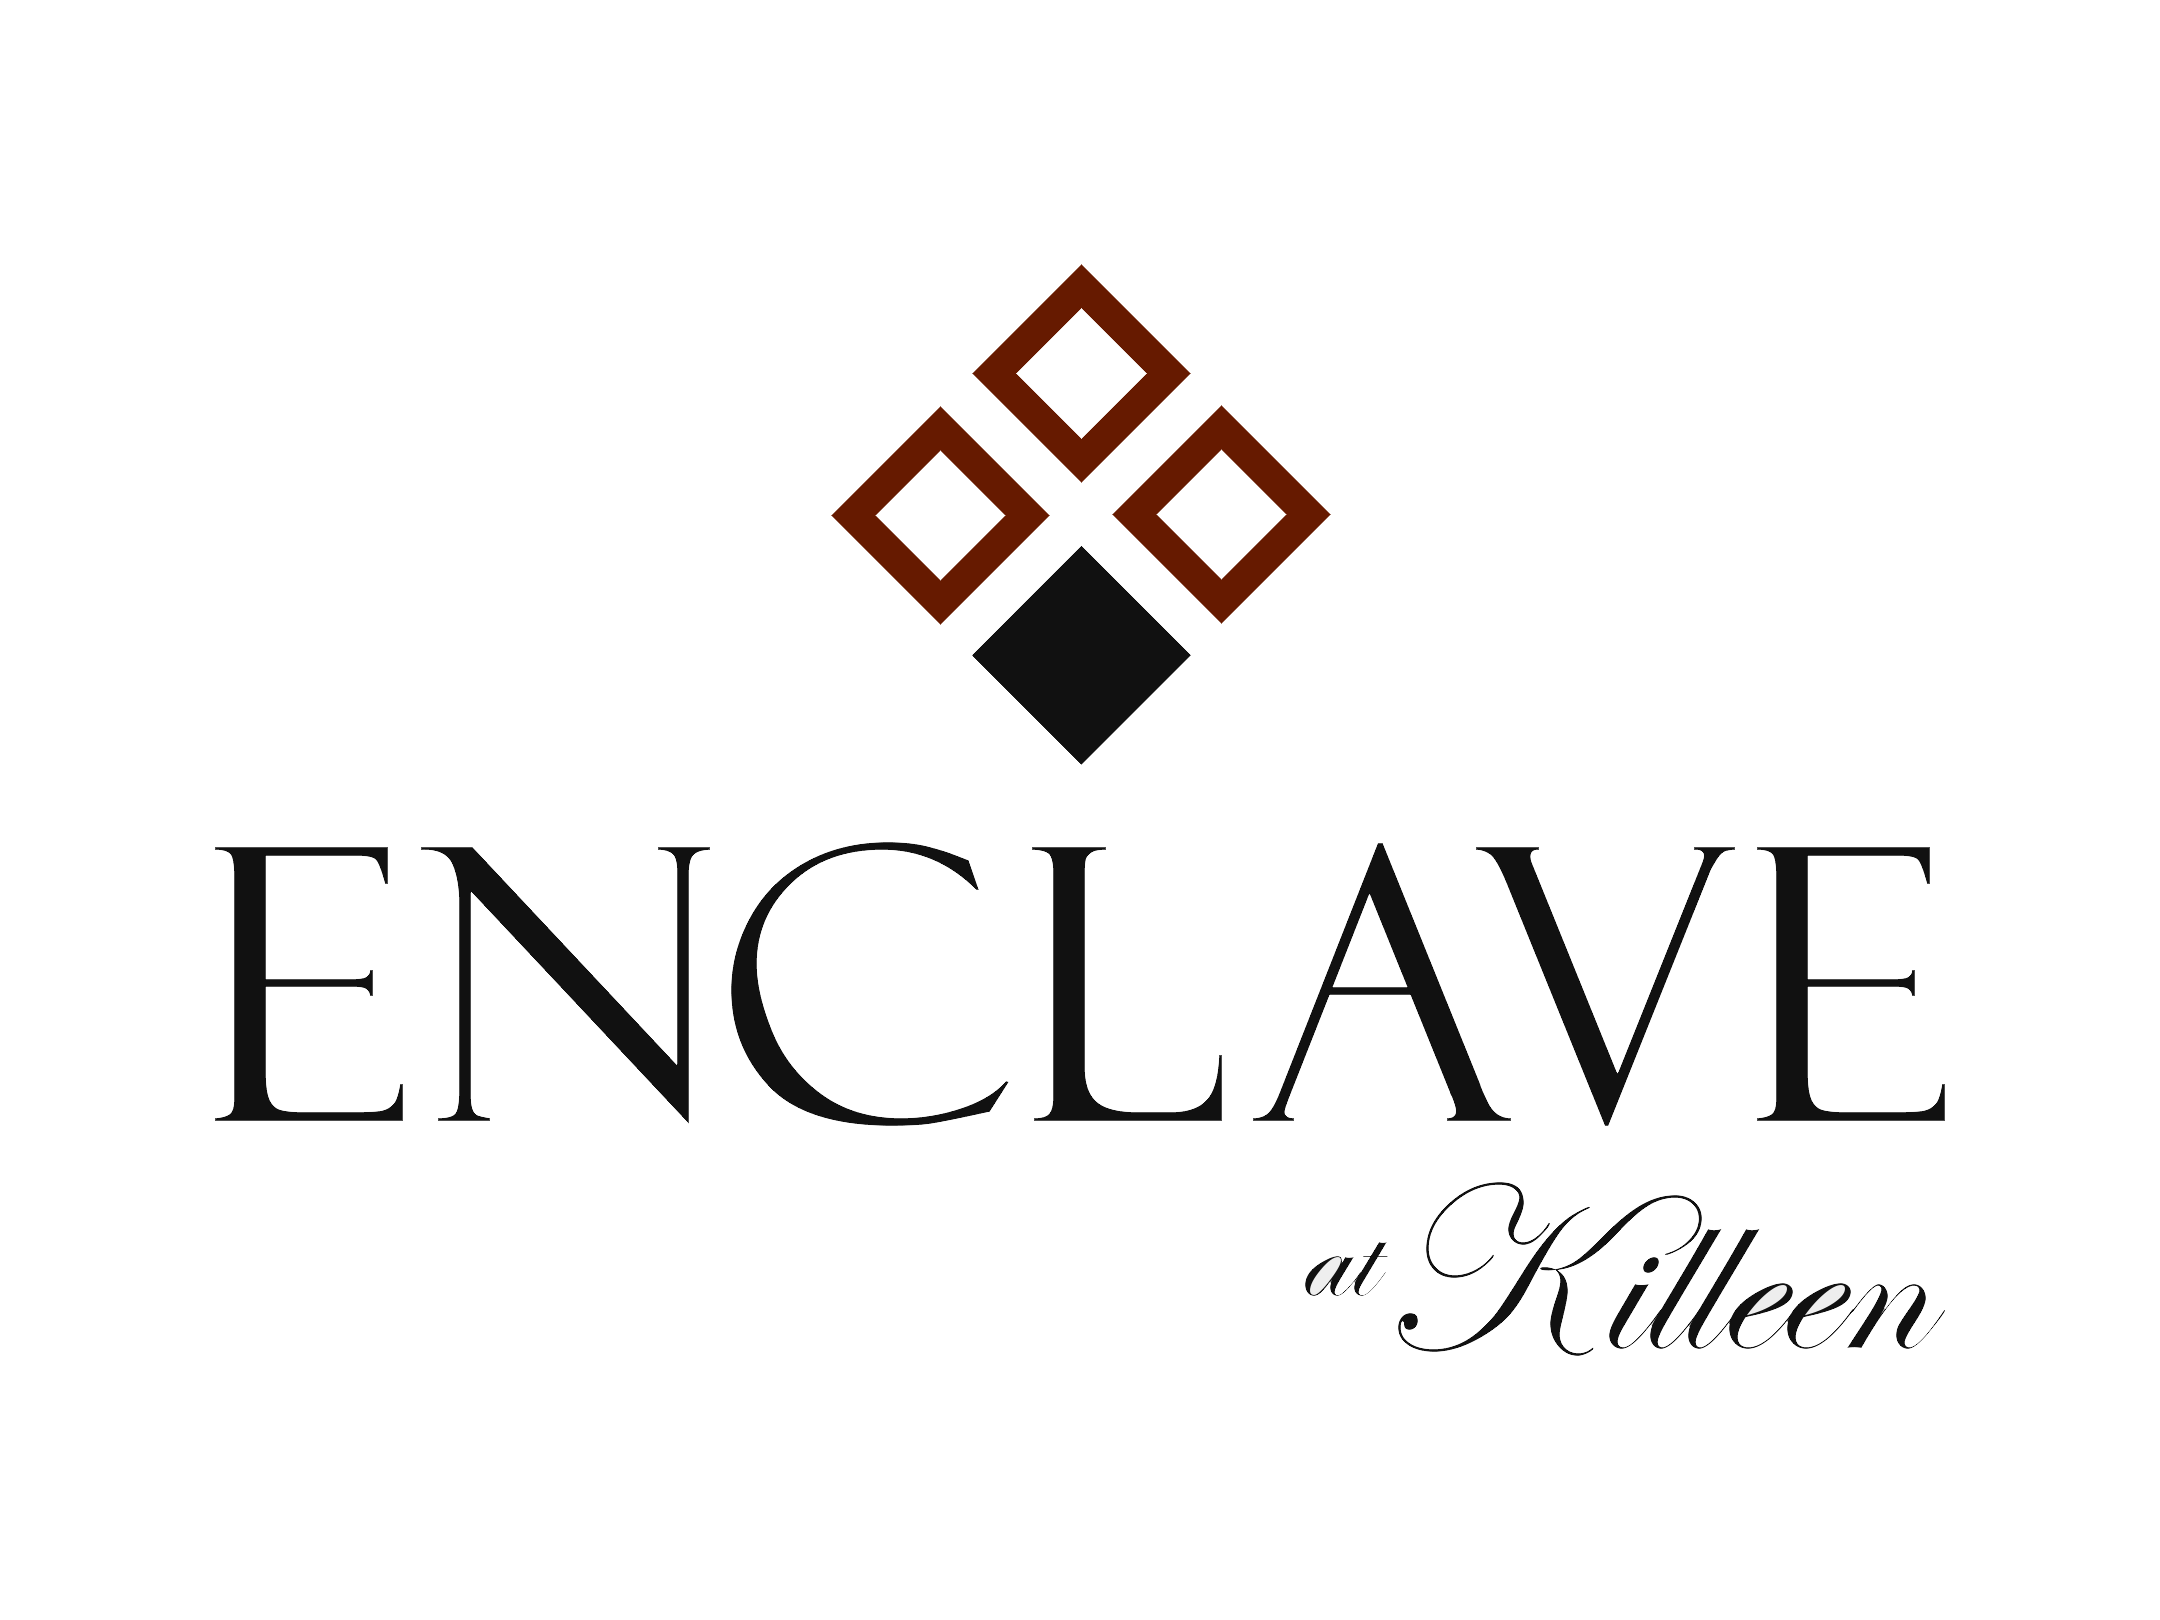 Enclave at Killeen